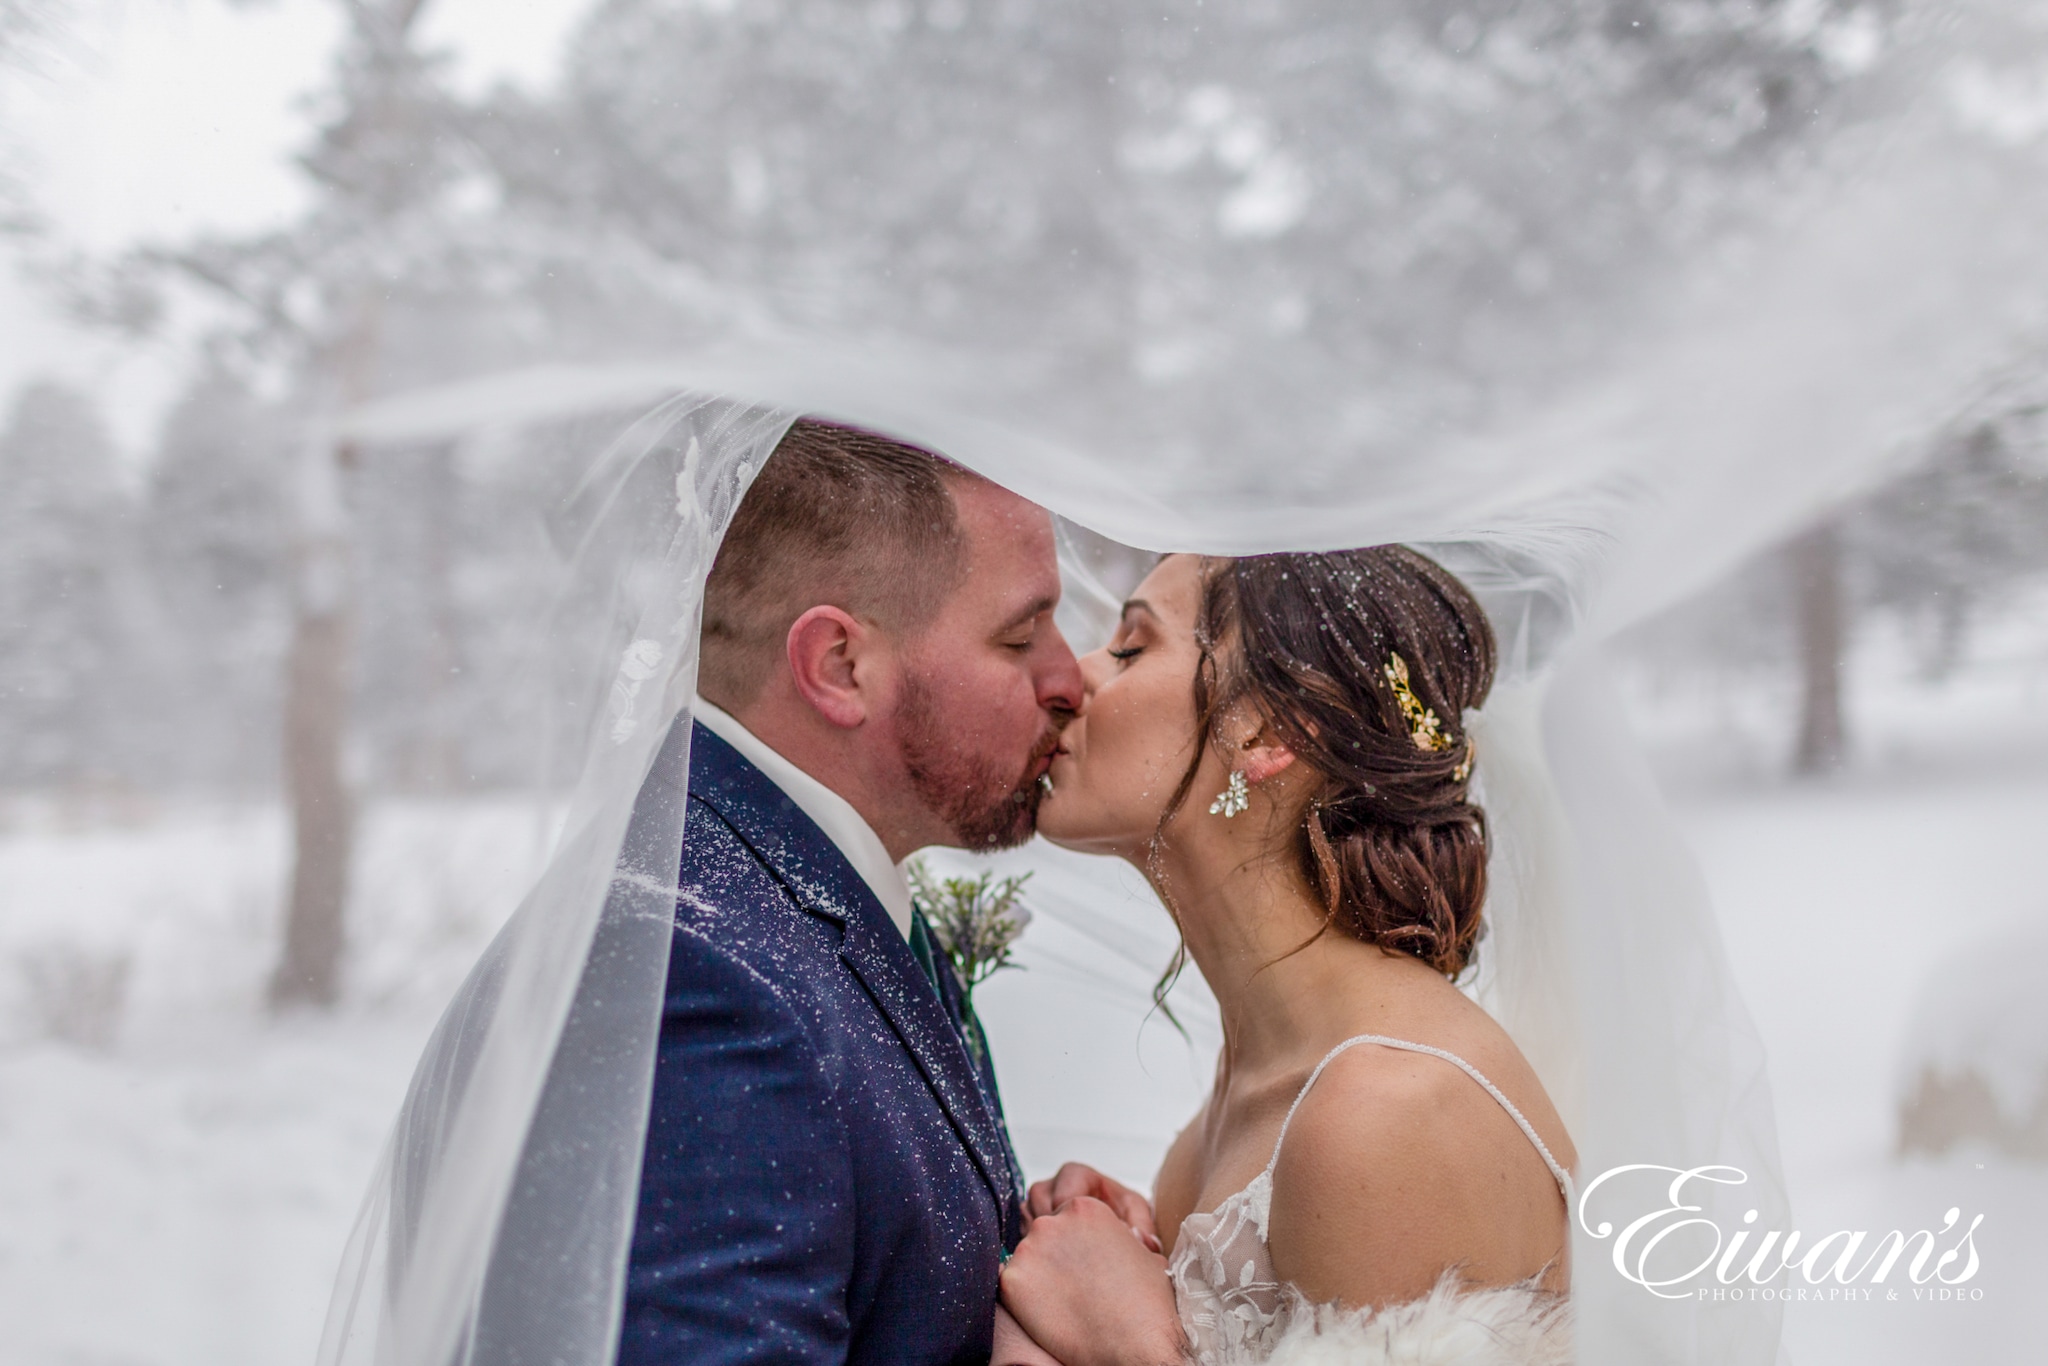 image of a bride and groom kissing